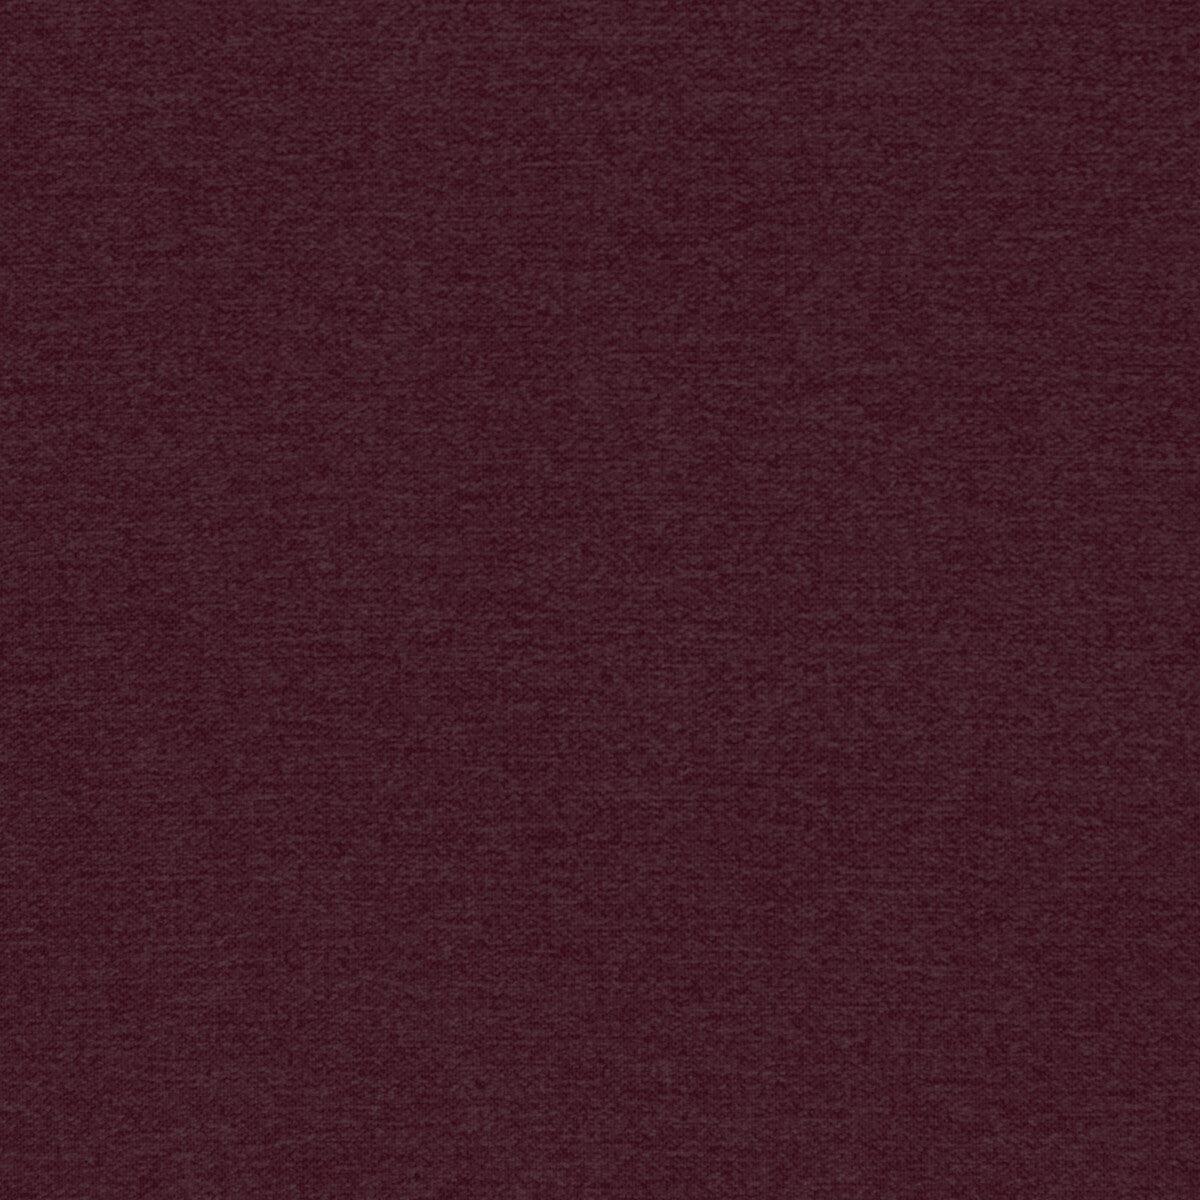 Hurdle fabric in mulberry color - pattern 36259.9.0 - by Kravet Contract in the Supreen collection